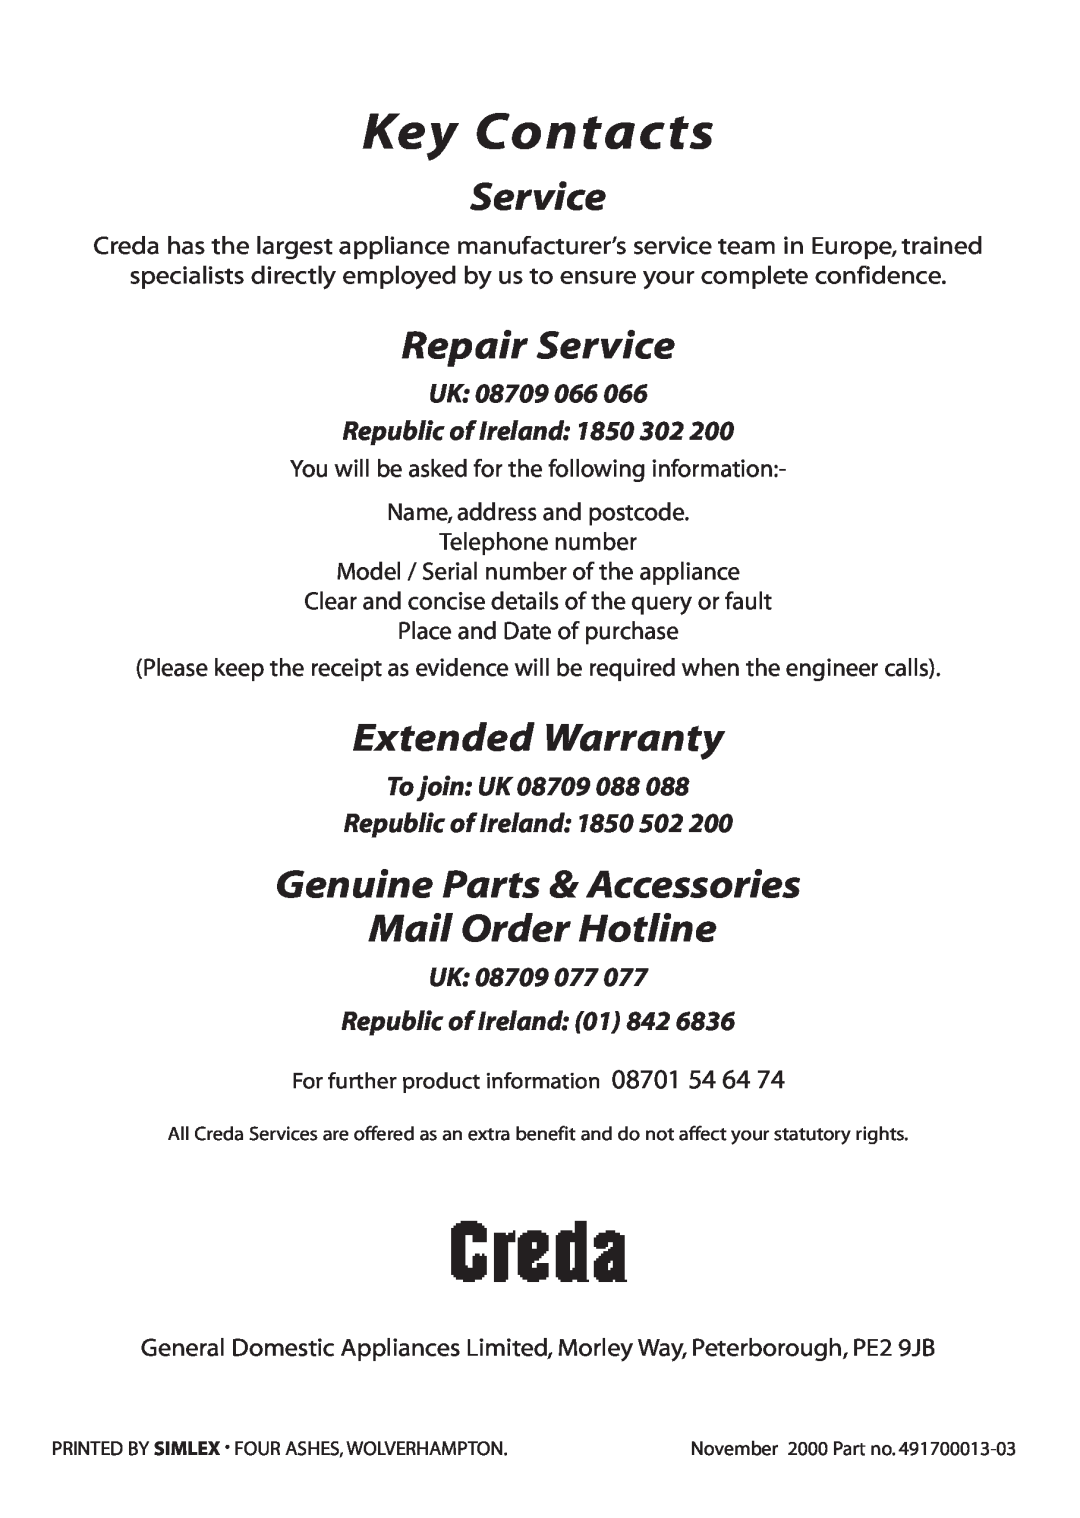 Creda M350E manual Key Contacts, Repair Service, Extended Warranty, Genuine Parts & Accessories Mail Order Hotline 